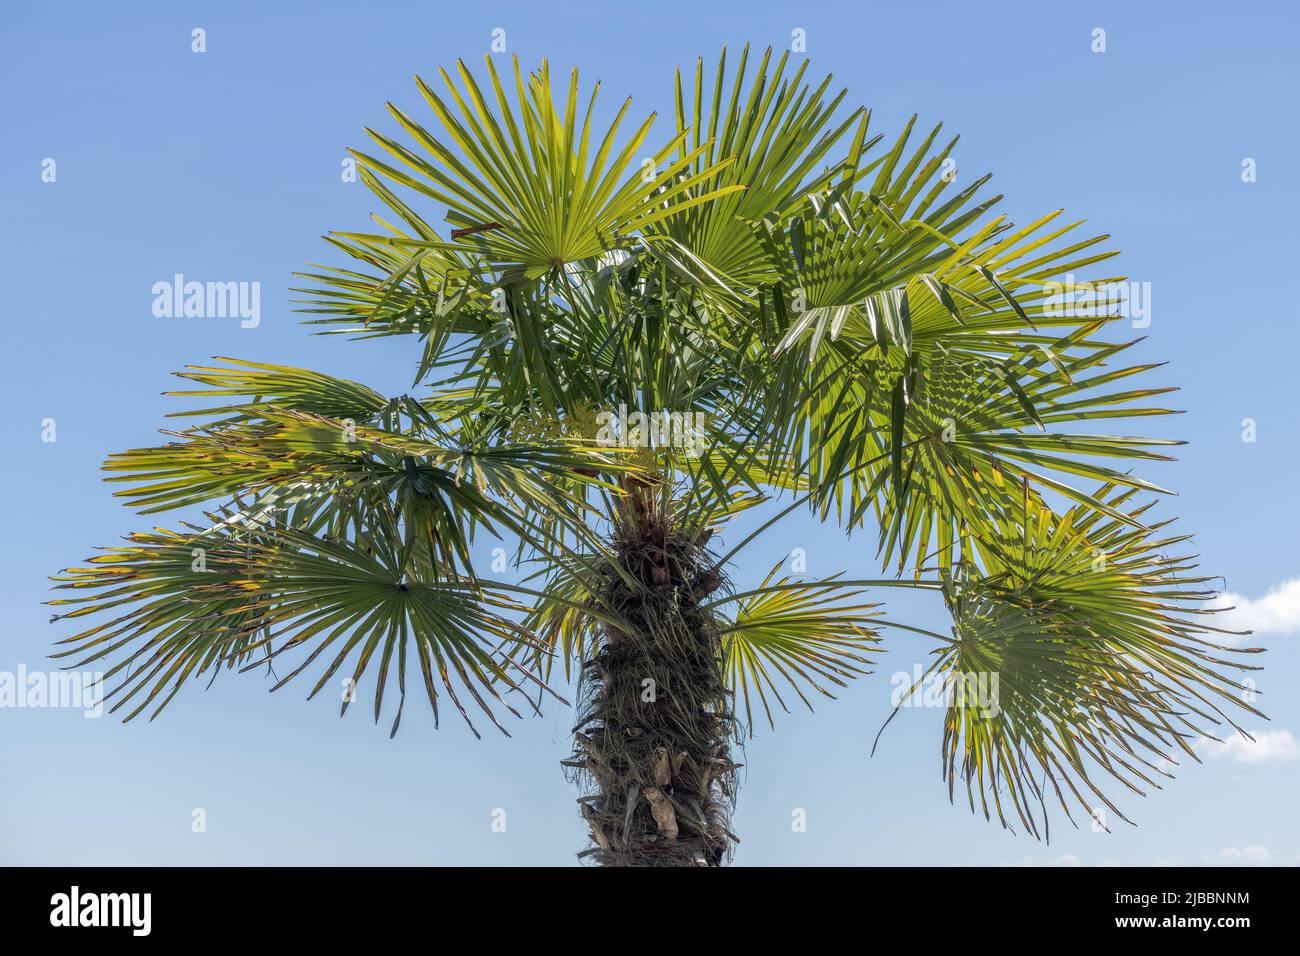 Palm tree at water's edge on blue sky background. Mainau island, lake constance, Constance. Stock Photo